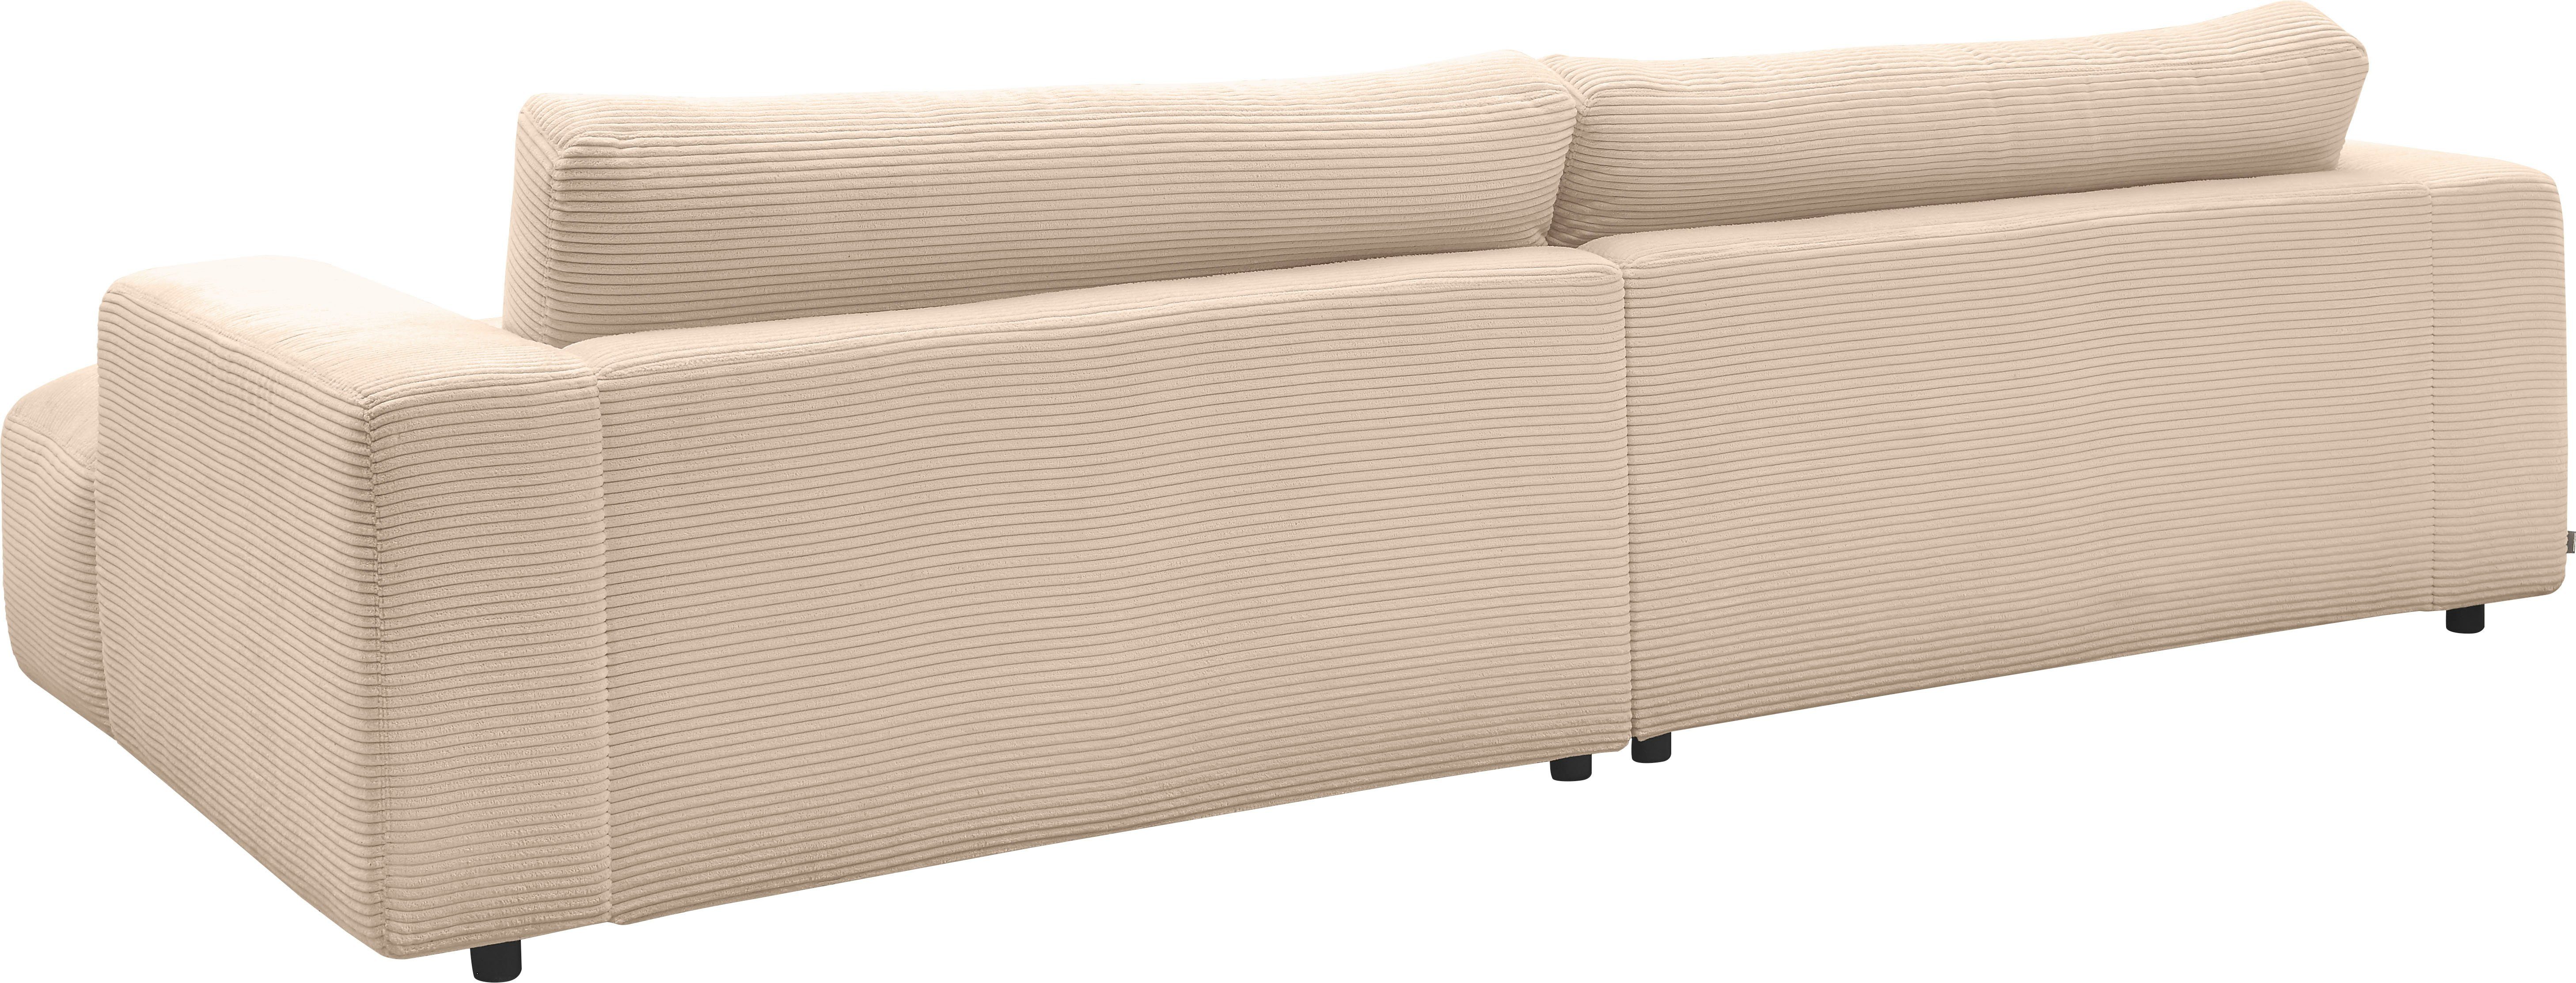 GALLERY M branded by Musterring 292 Lucia, nature Cord-Bezug, Breite cm Loungesofa